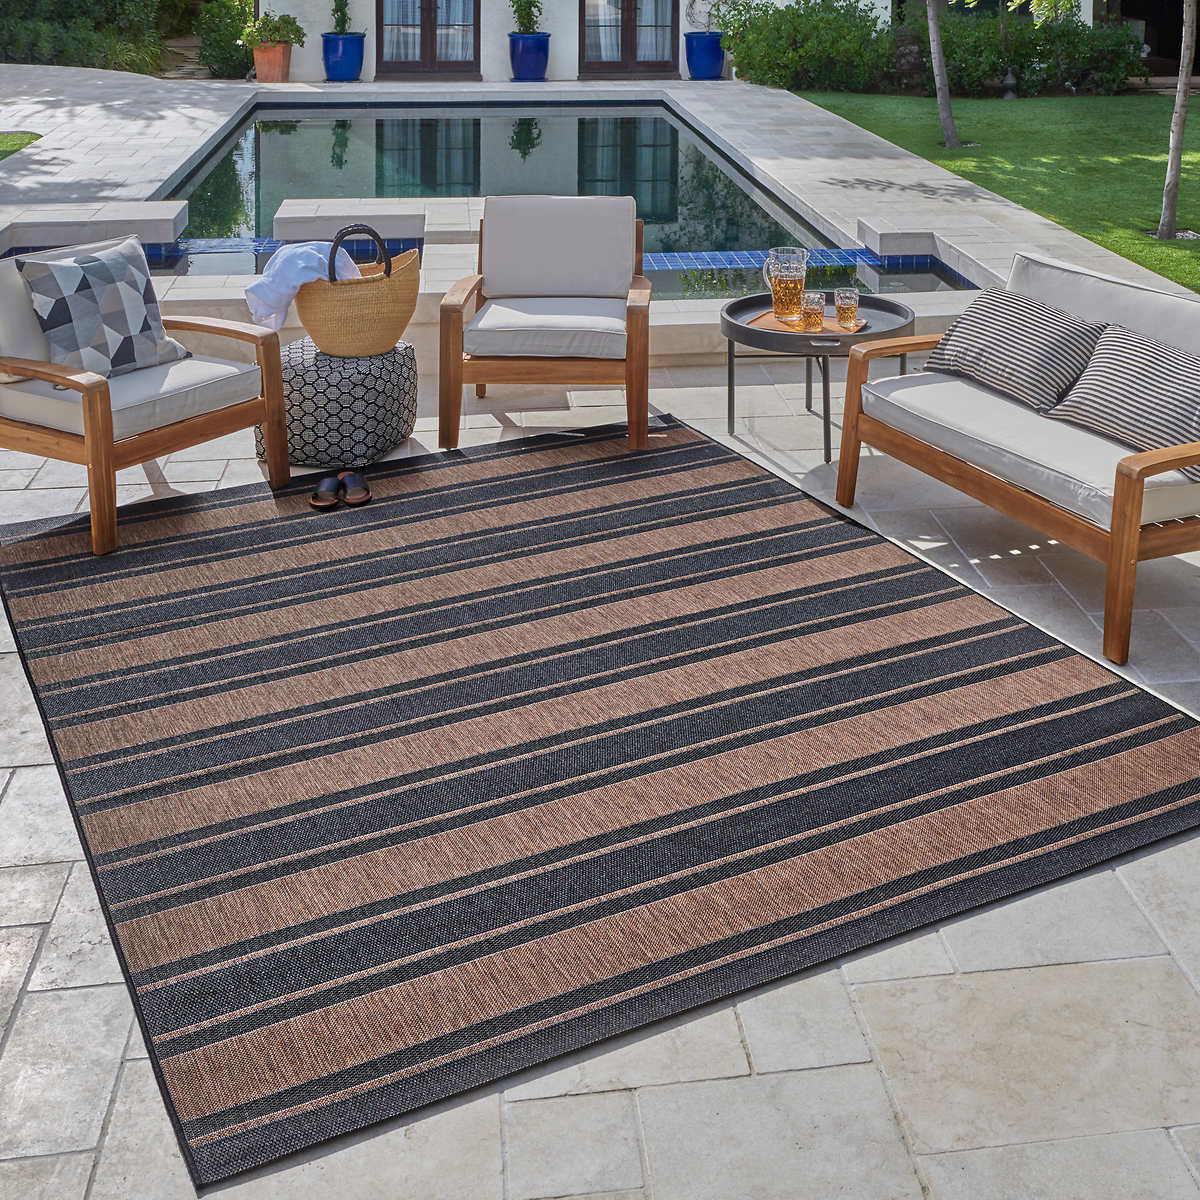 Naples Indoor Outdoor Rug Collection, How To Get Mold Out Of Outdoor Rugs